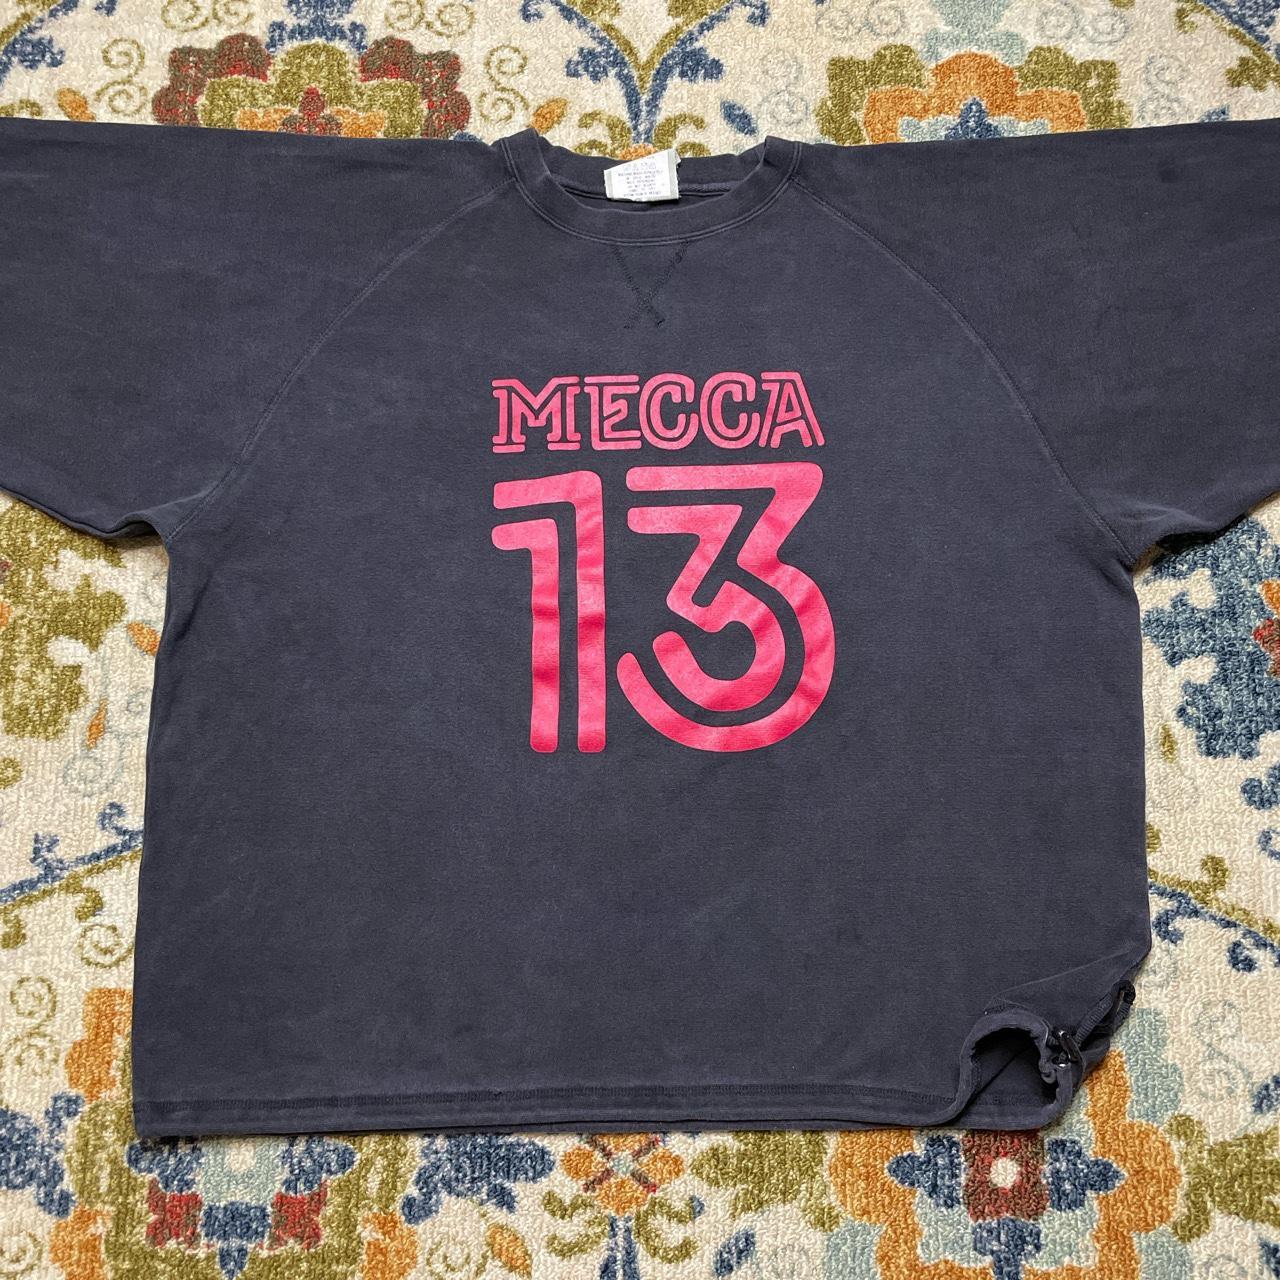 Product Image 2 - Vintage Mecca #13 black spellout